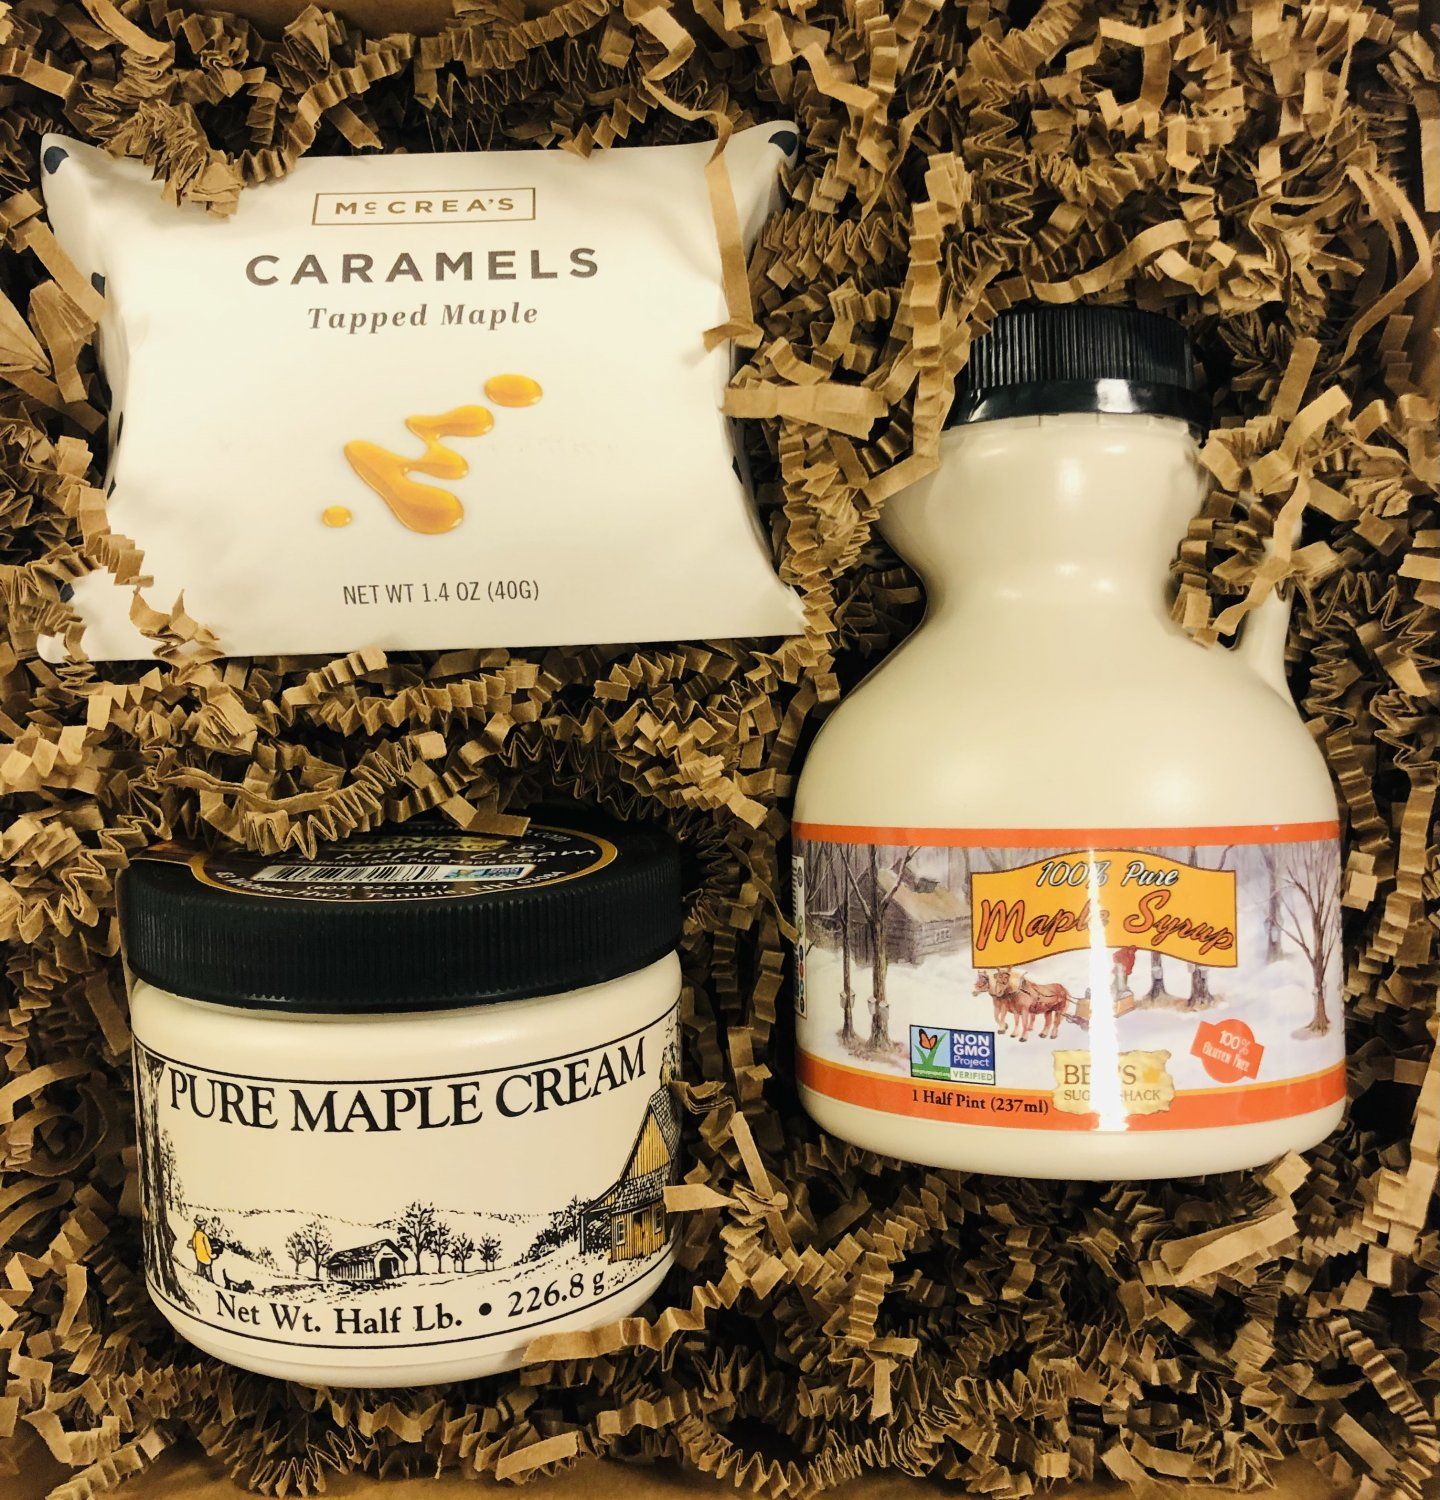 Previous Happening: Winter Week 4: Winter greens & new maple products!